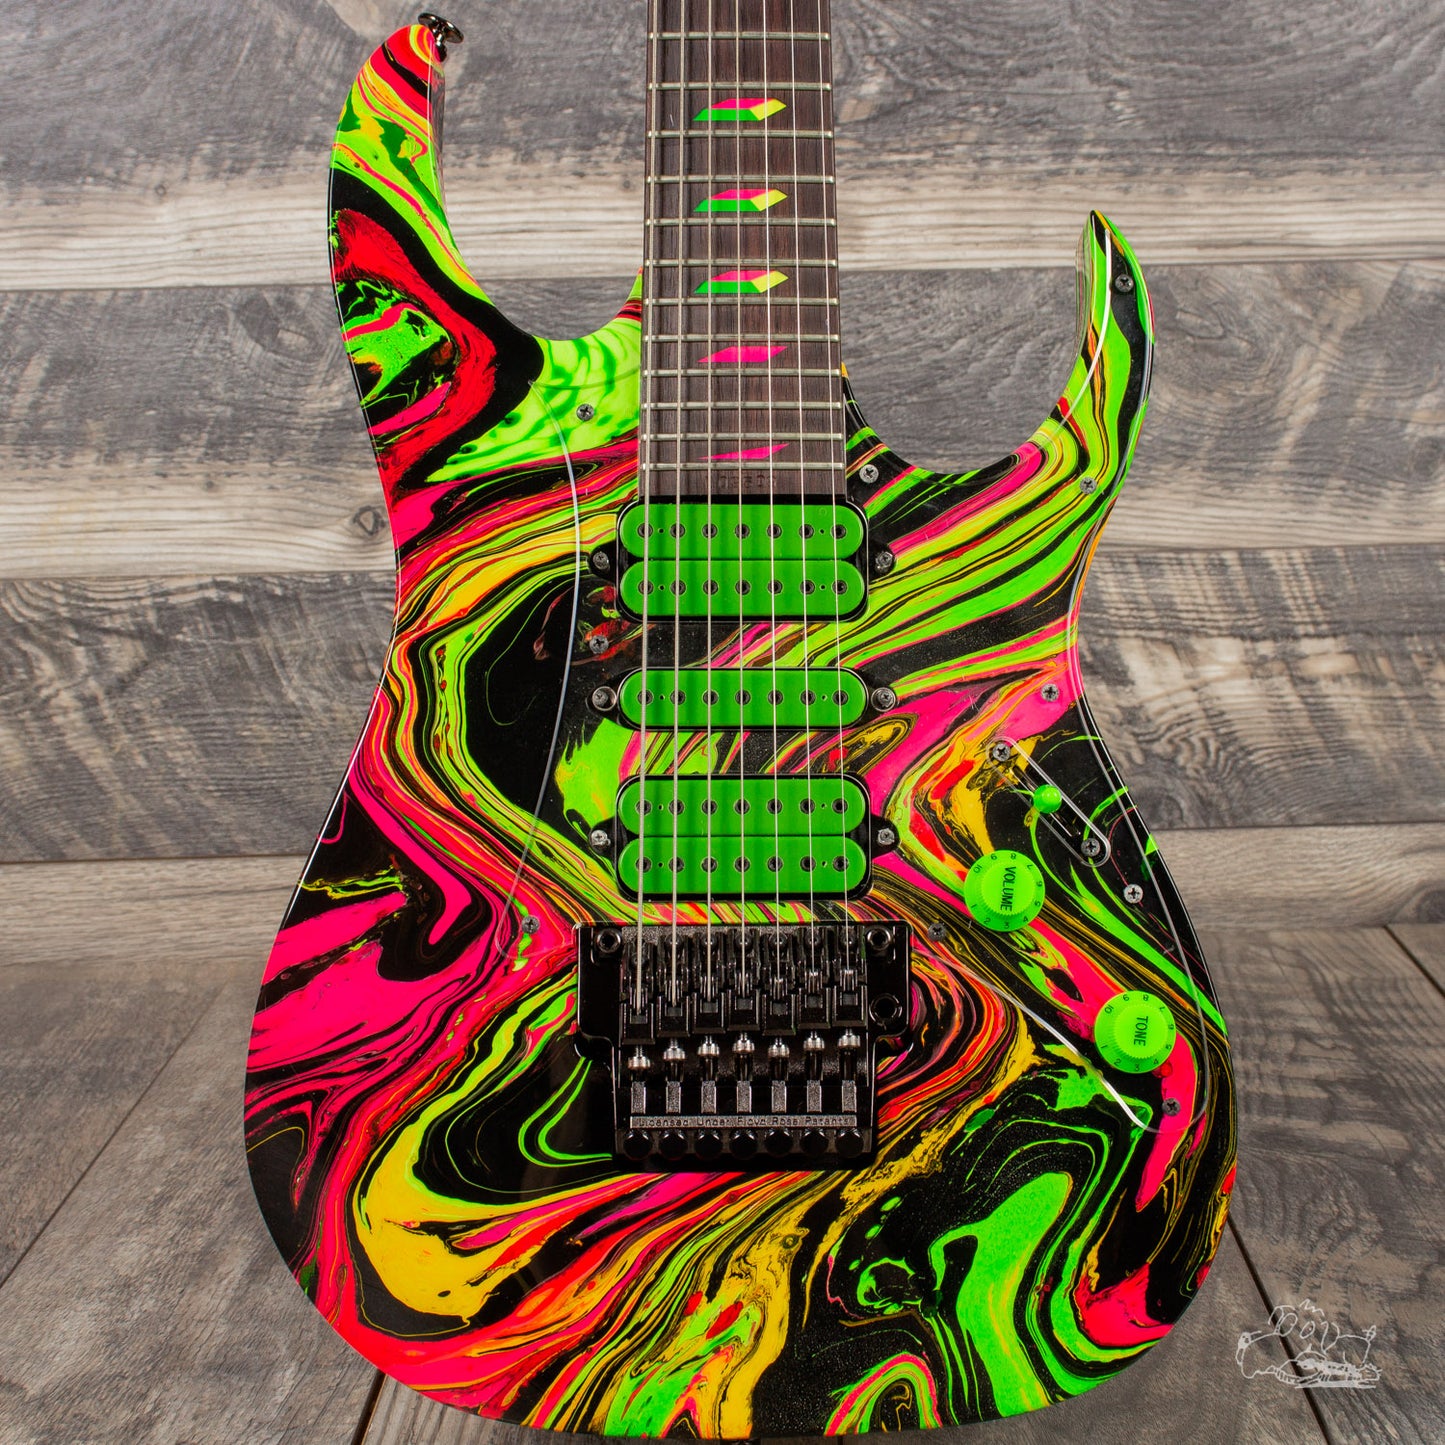 2010 Ibanez Steve Vai Signature UV77RE MC - 20th Anniversary - Only 100 Made - Make an Offer!